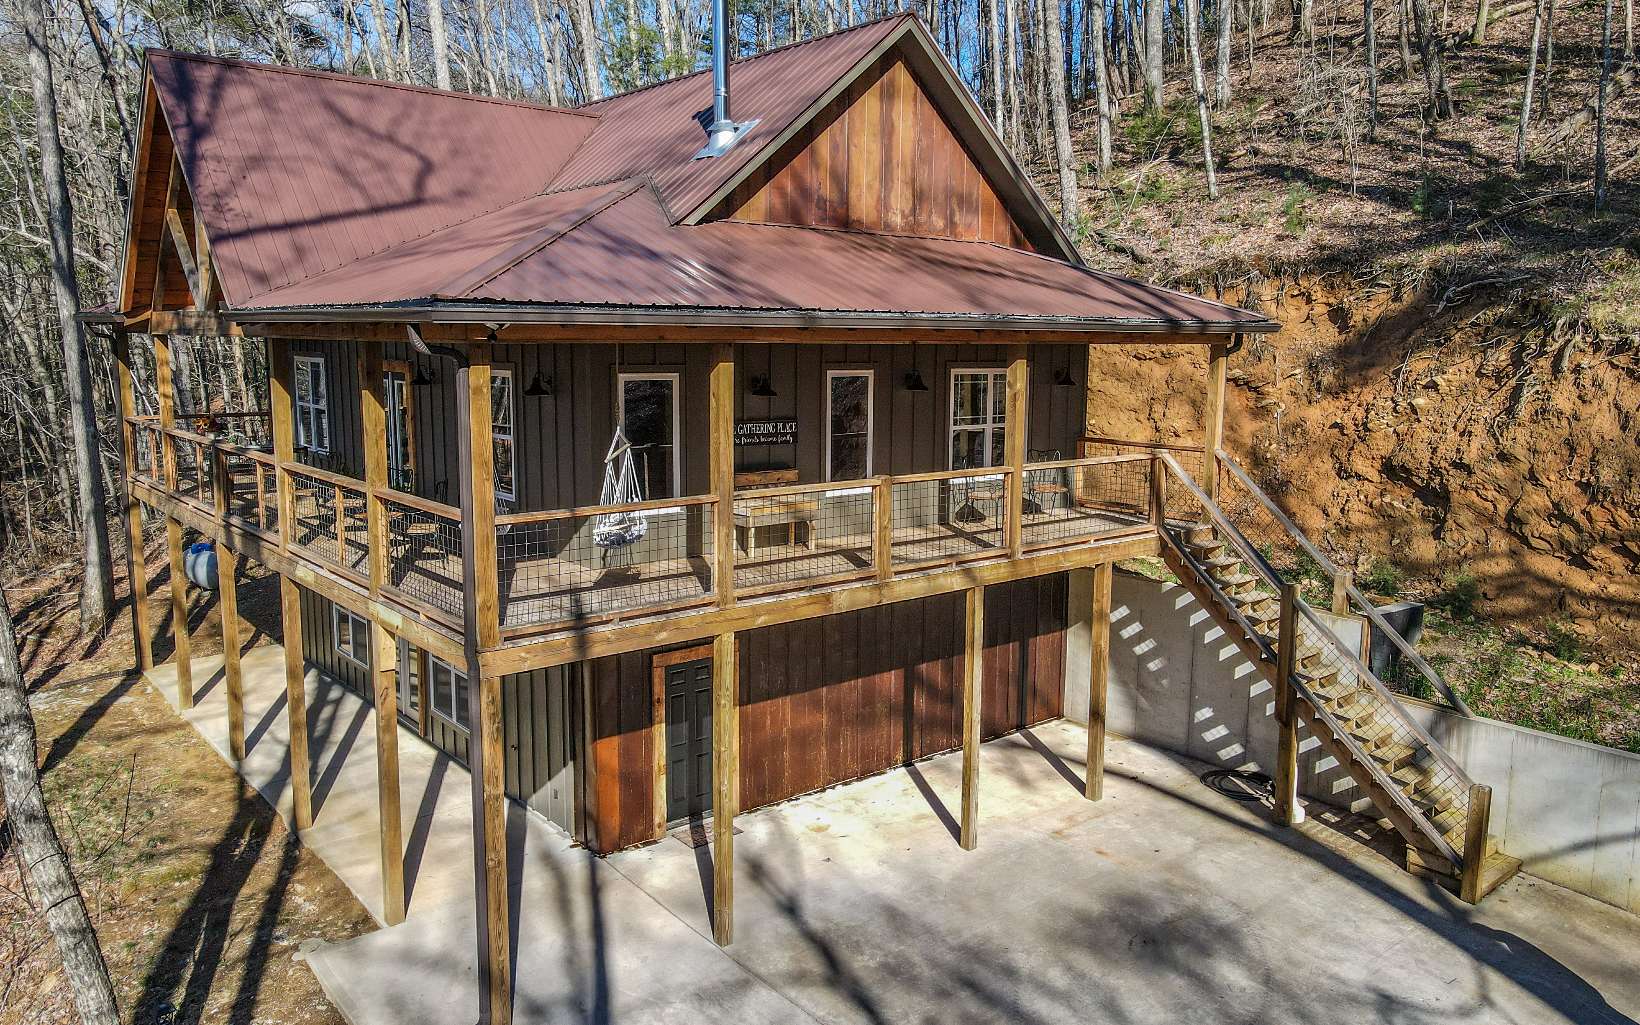 Is it a beautiful mountain home in the woods in Cherry Log that you're looking for? Or is it an excellent short-term rental that sleeps 10 people? This is the DREAMHOME that you've been searching for! With plenty of seclusion and soothing sounds of the creek and surrounding nature, this handcrafted, custom home sits on 1.48 acres of land. This mostly furnished, NEW CONSTRUCTION home has been beautifully decorated and was designed to be energy efficient with zoned heating and air. The primary bedroom and bath are on the main level along with a second bedroom and bath. A large open kitchen, dining and living room combo for a grand area with with high tongue and groove ceilings and a beautiful hand crafted mantel with a wood burning stove. The lower level has a bunk room area, bathroom, laundry and large game room which is perfect for a pool table and bar. This won't last!